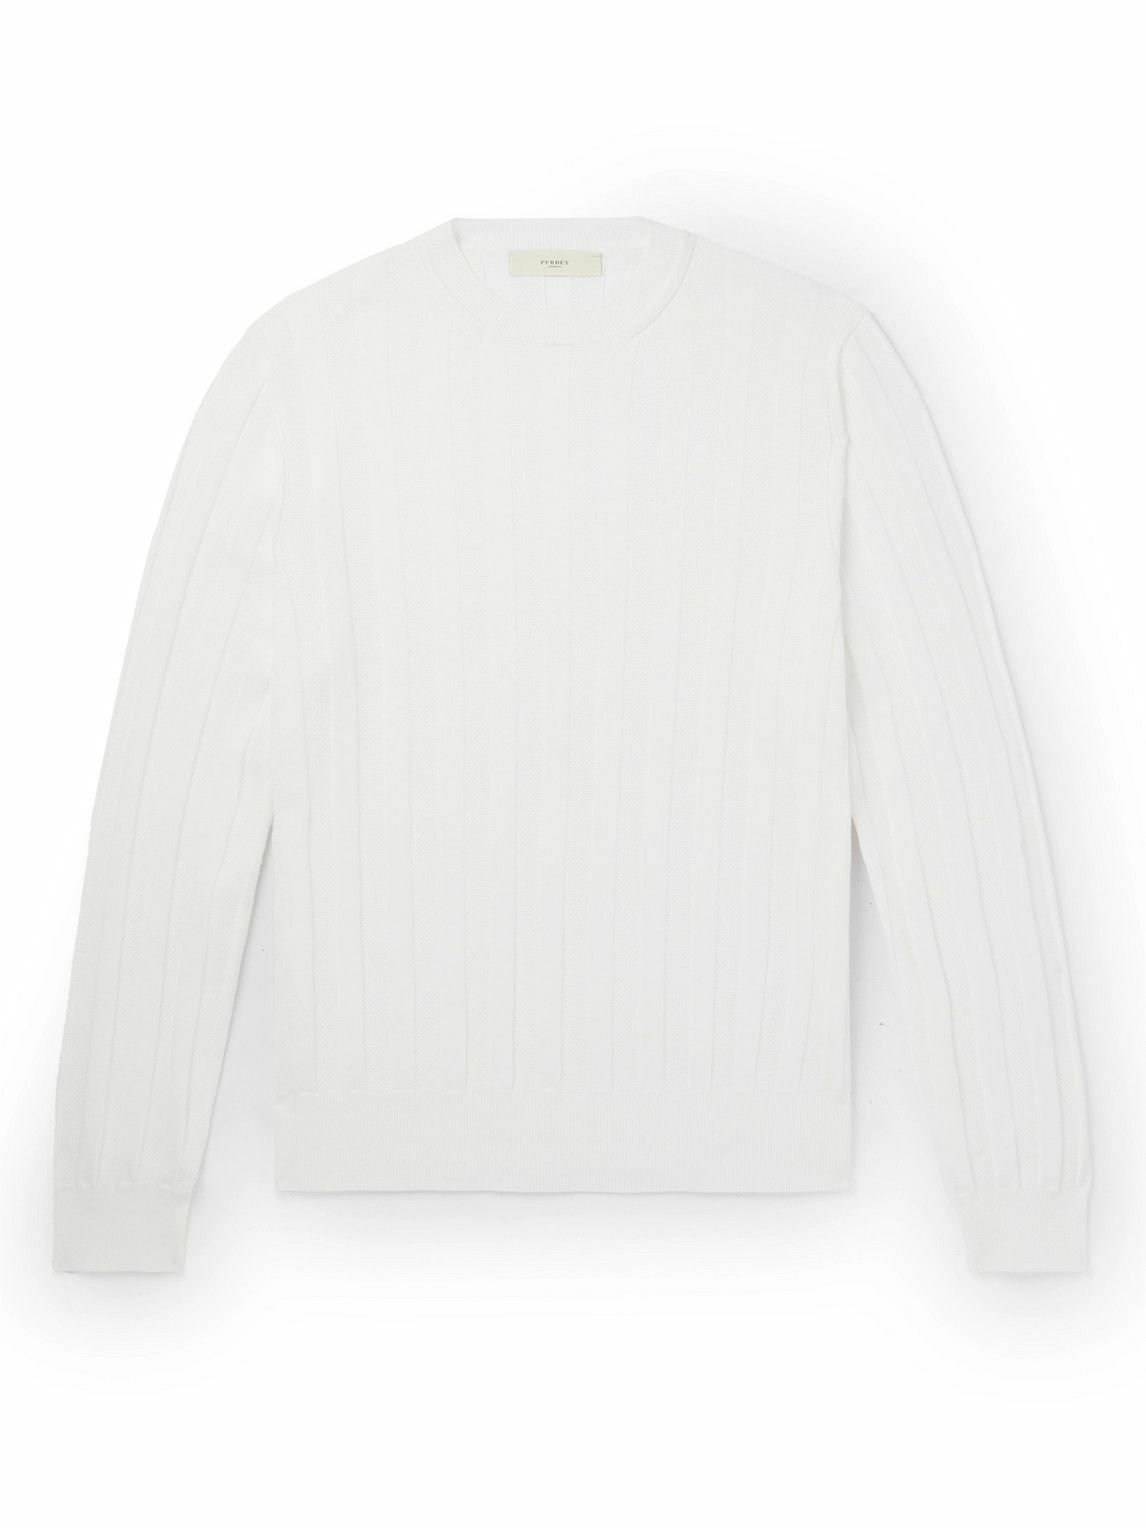 PURDEY - Slim-Fit Ribbed Cotton Sweater - White Purdey